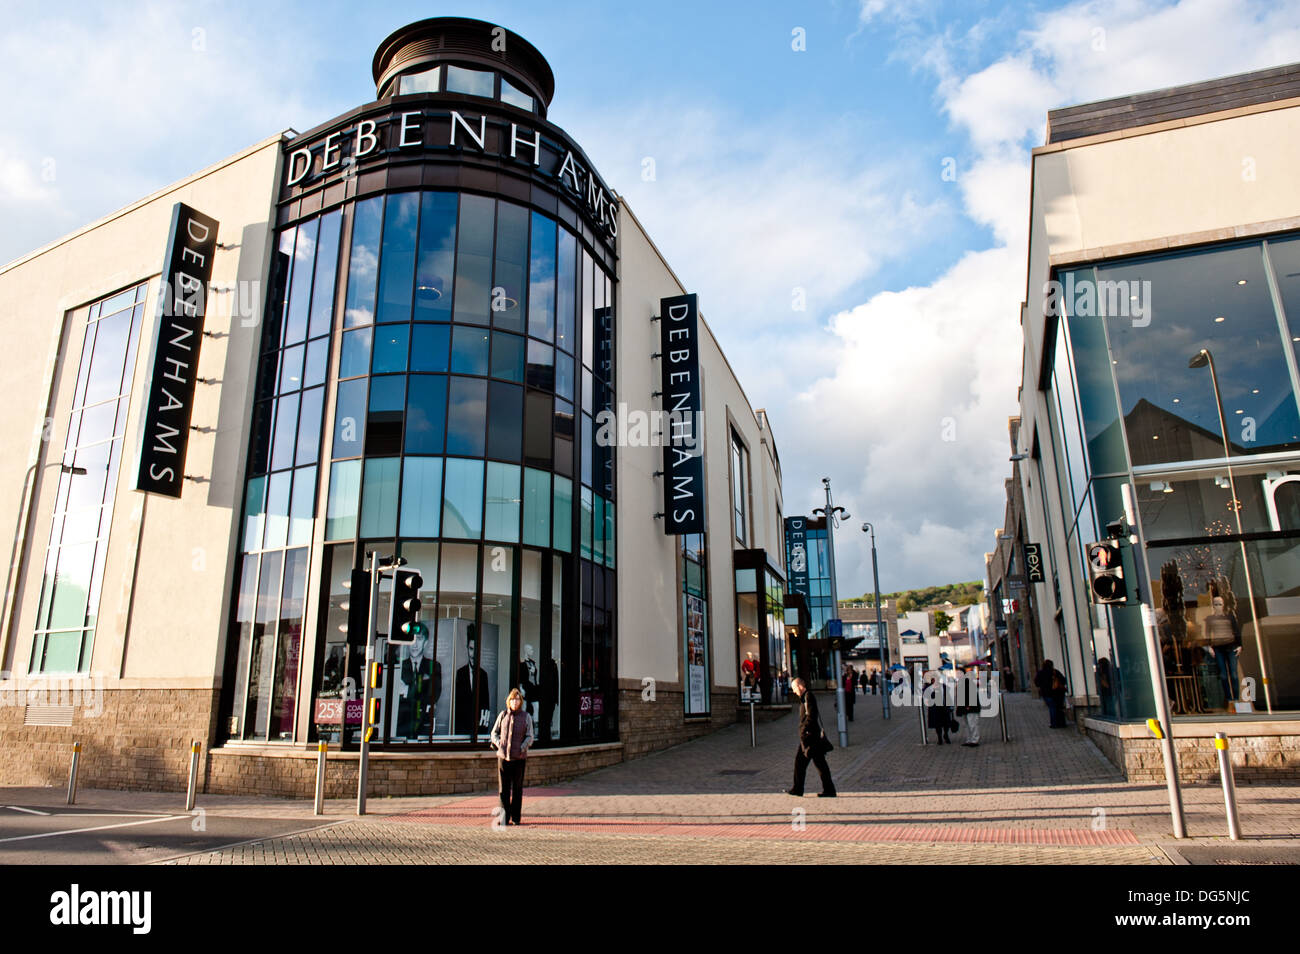 a-view-of-debenhams-department-store-at-stcatherines-walk-in-the-town-DG5NJC.jpg